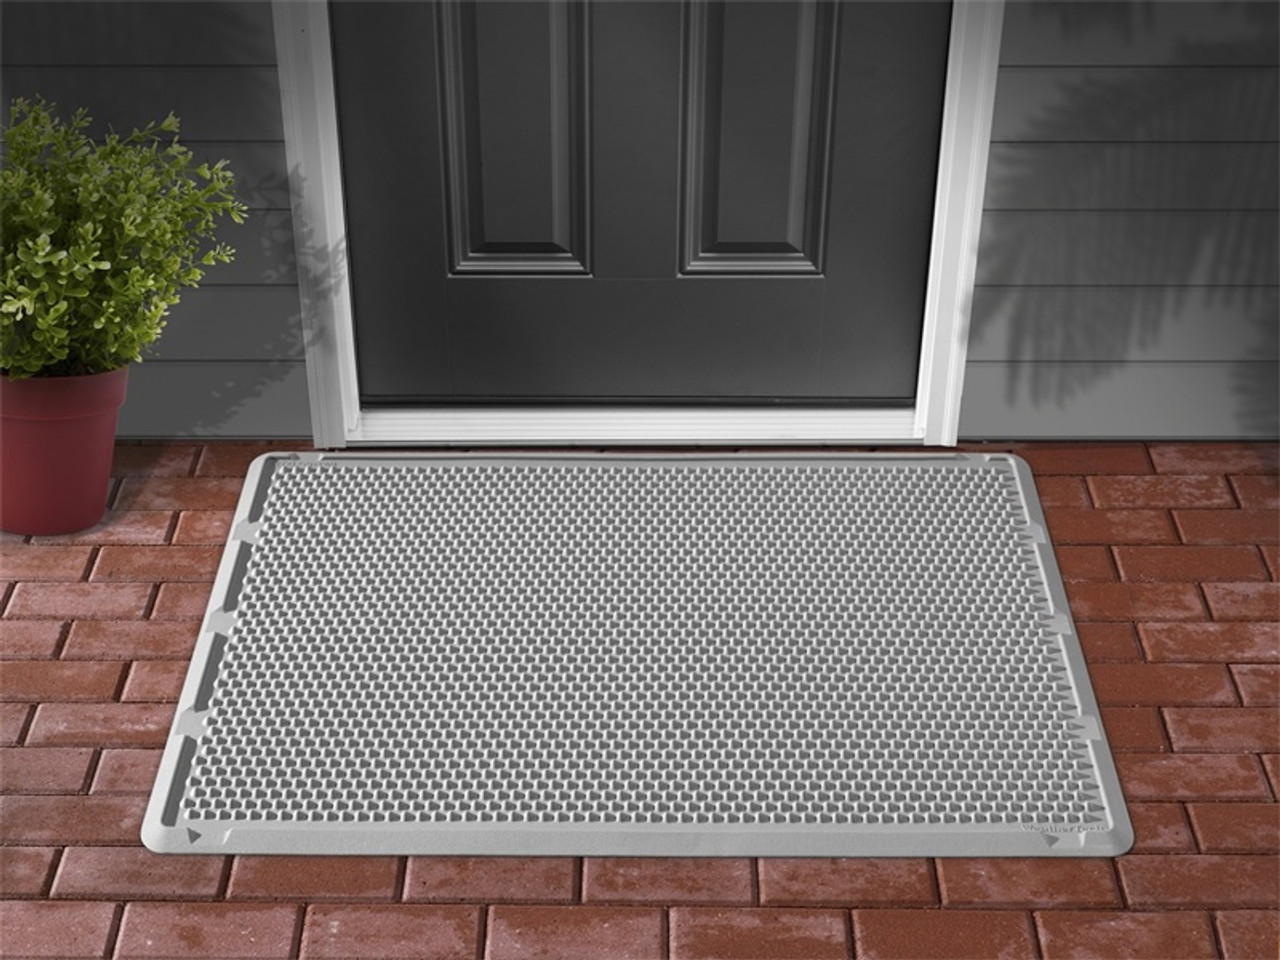 WeatherTech Universal Universal Universal Outdoor Mat 24in x 39in - Grey - ODM1BXG Photo - Primary